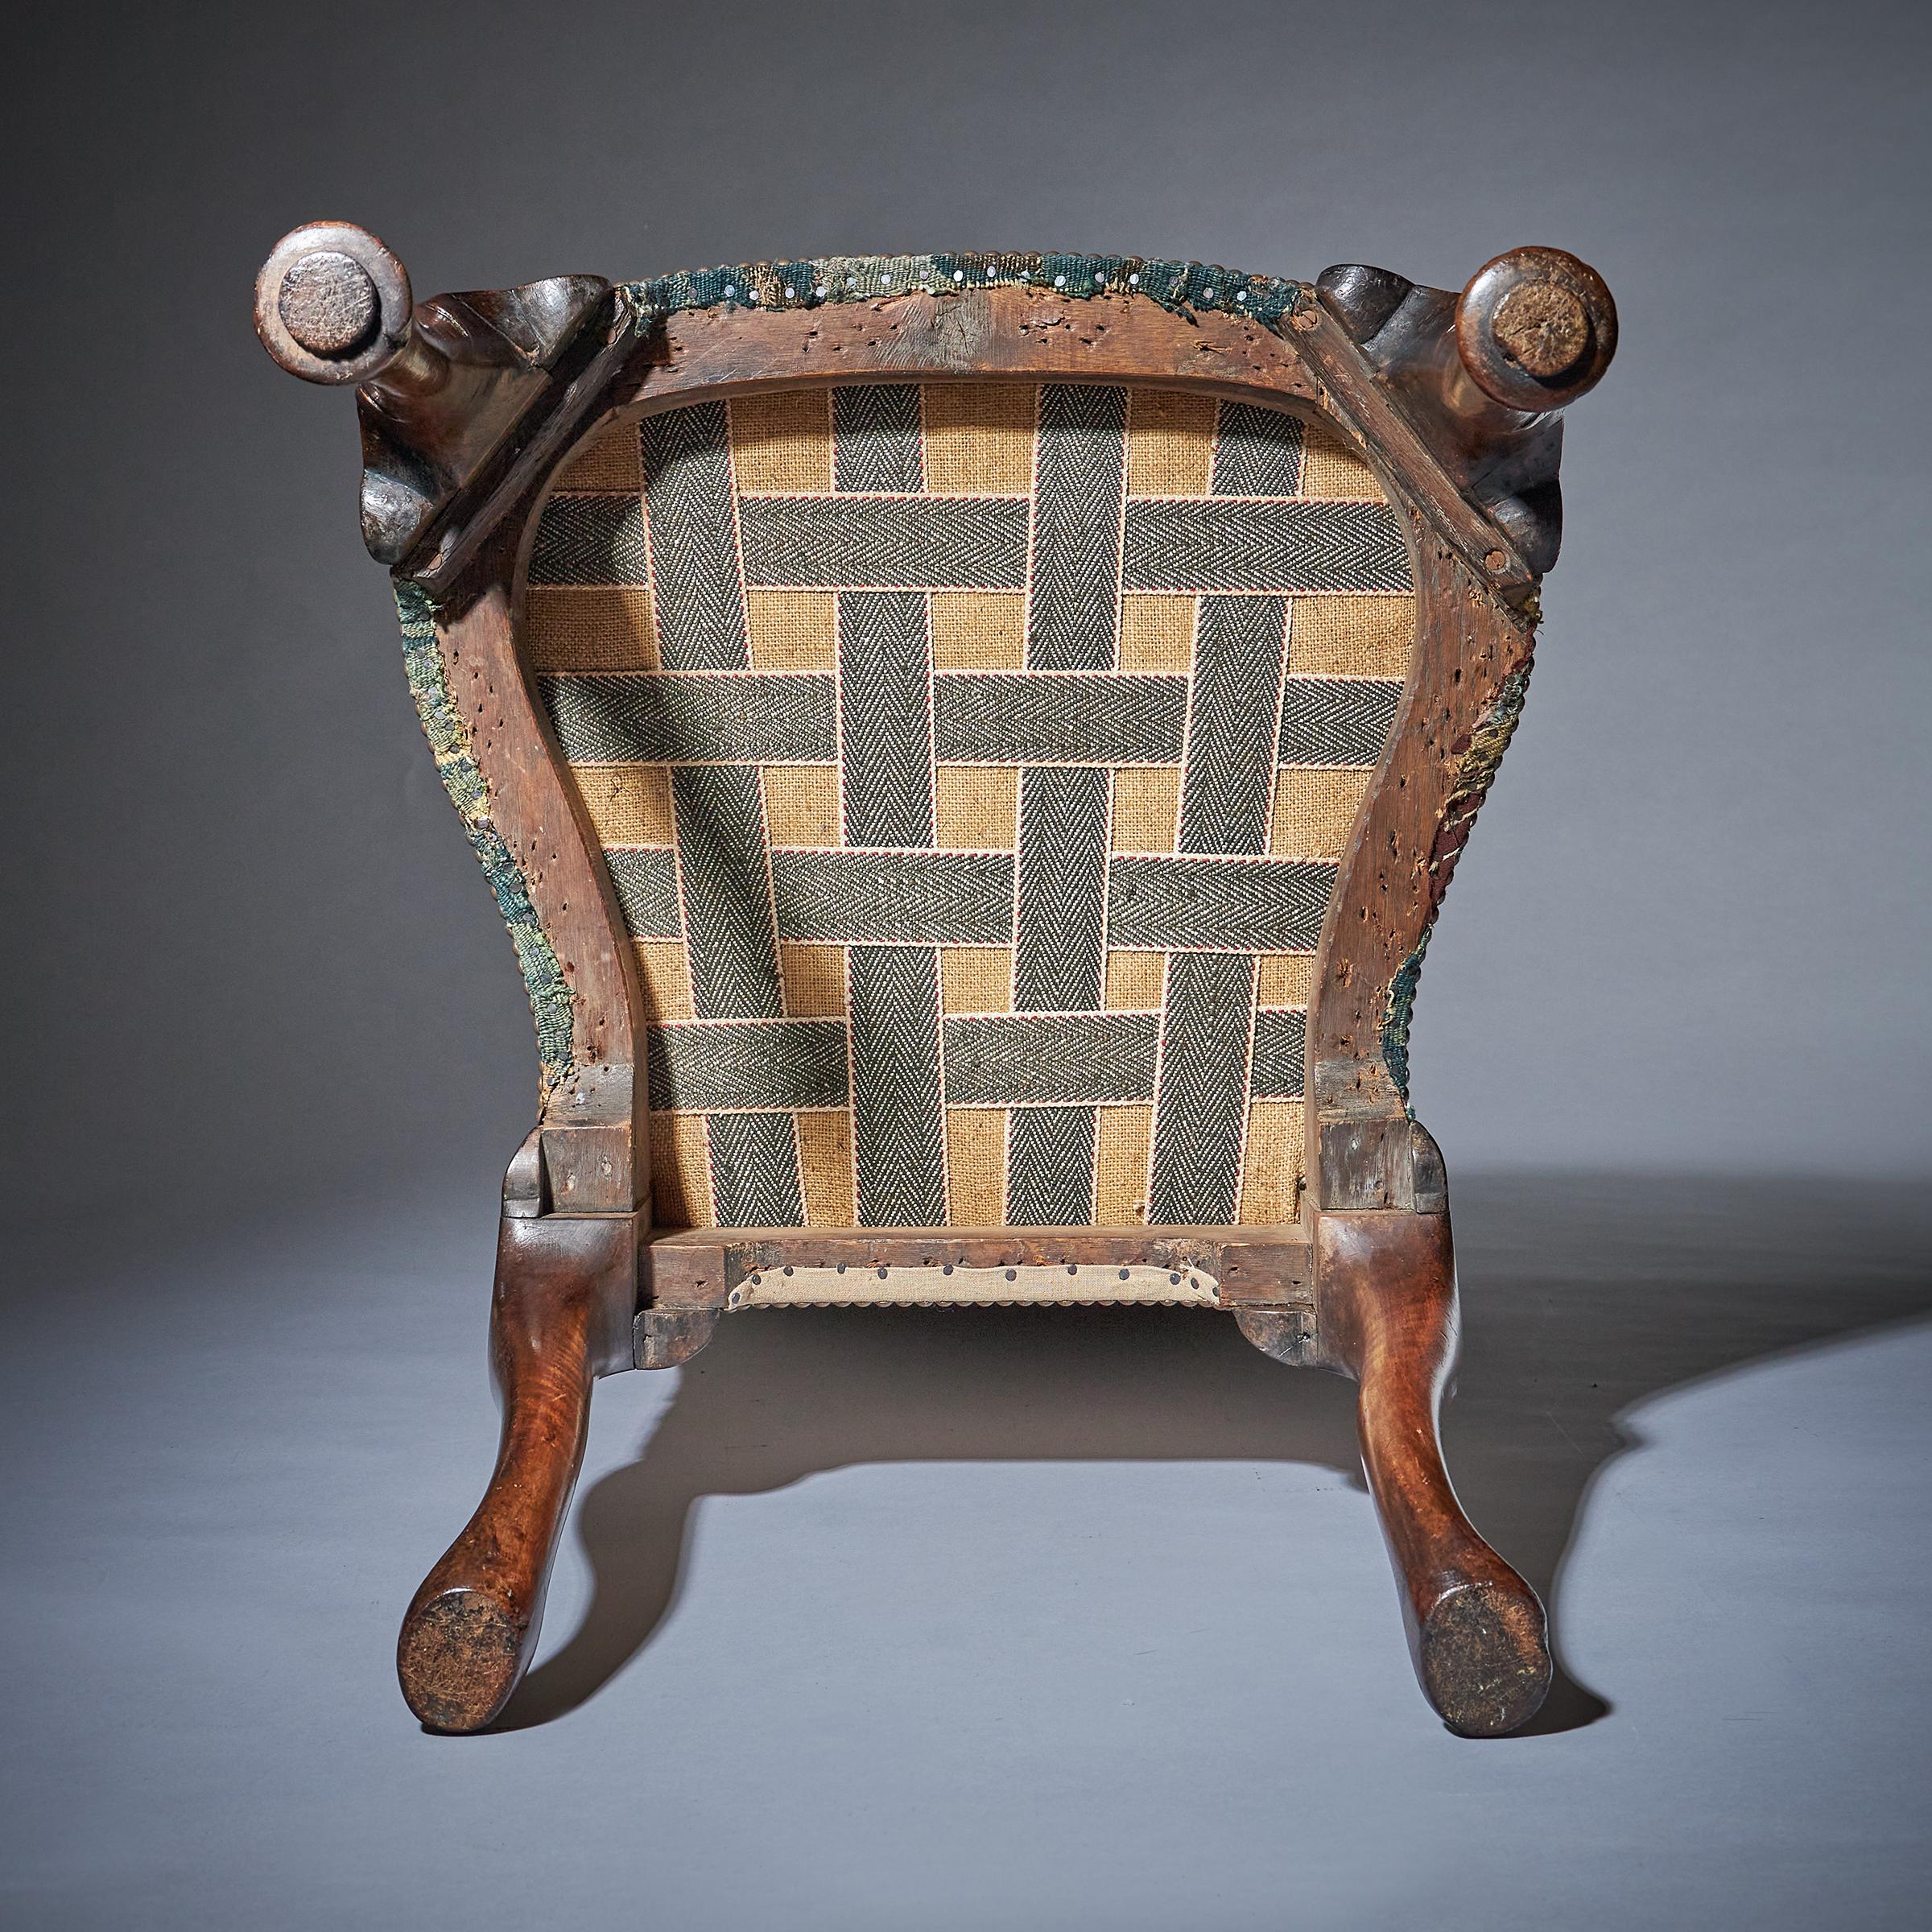 A Fine and Rare Queen Anne Walnut and Marquetry Chair with Tapestry Fragment 17